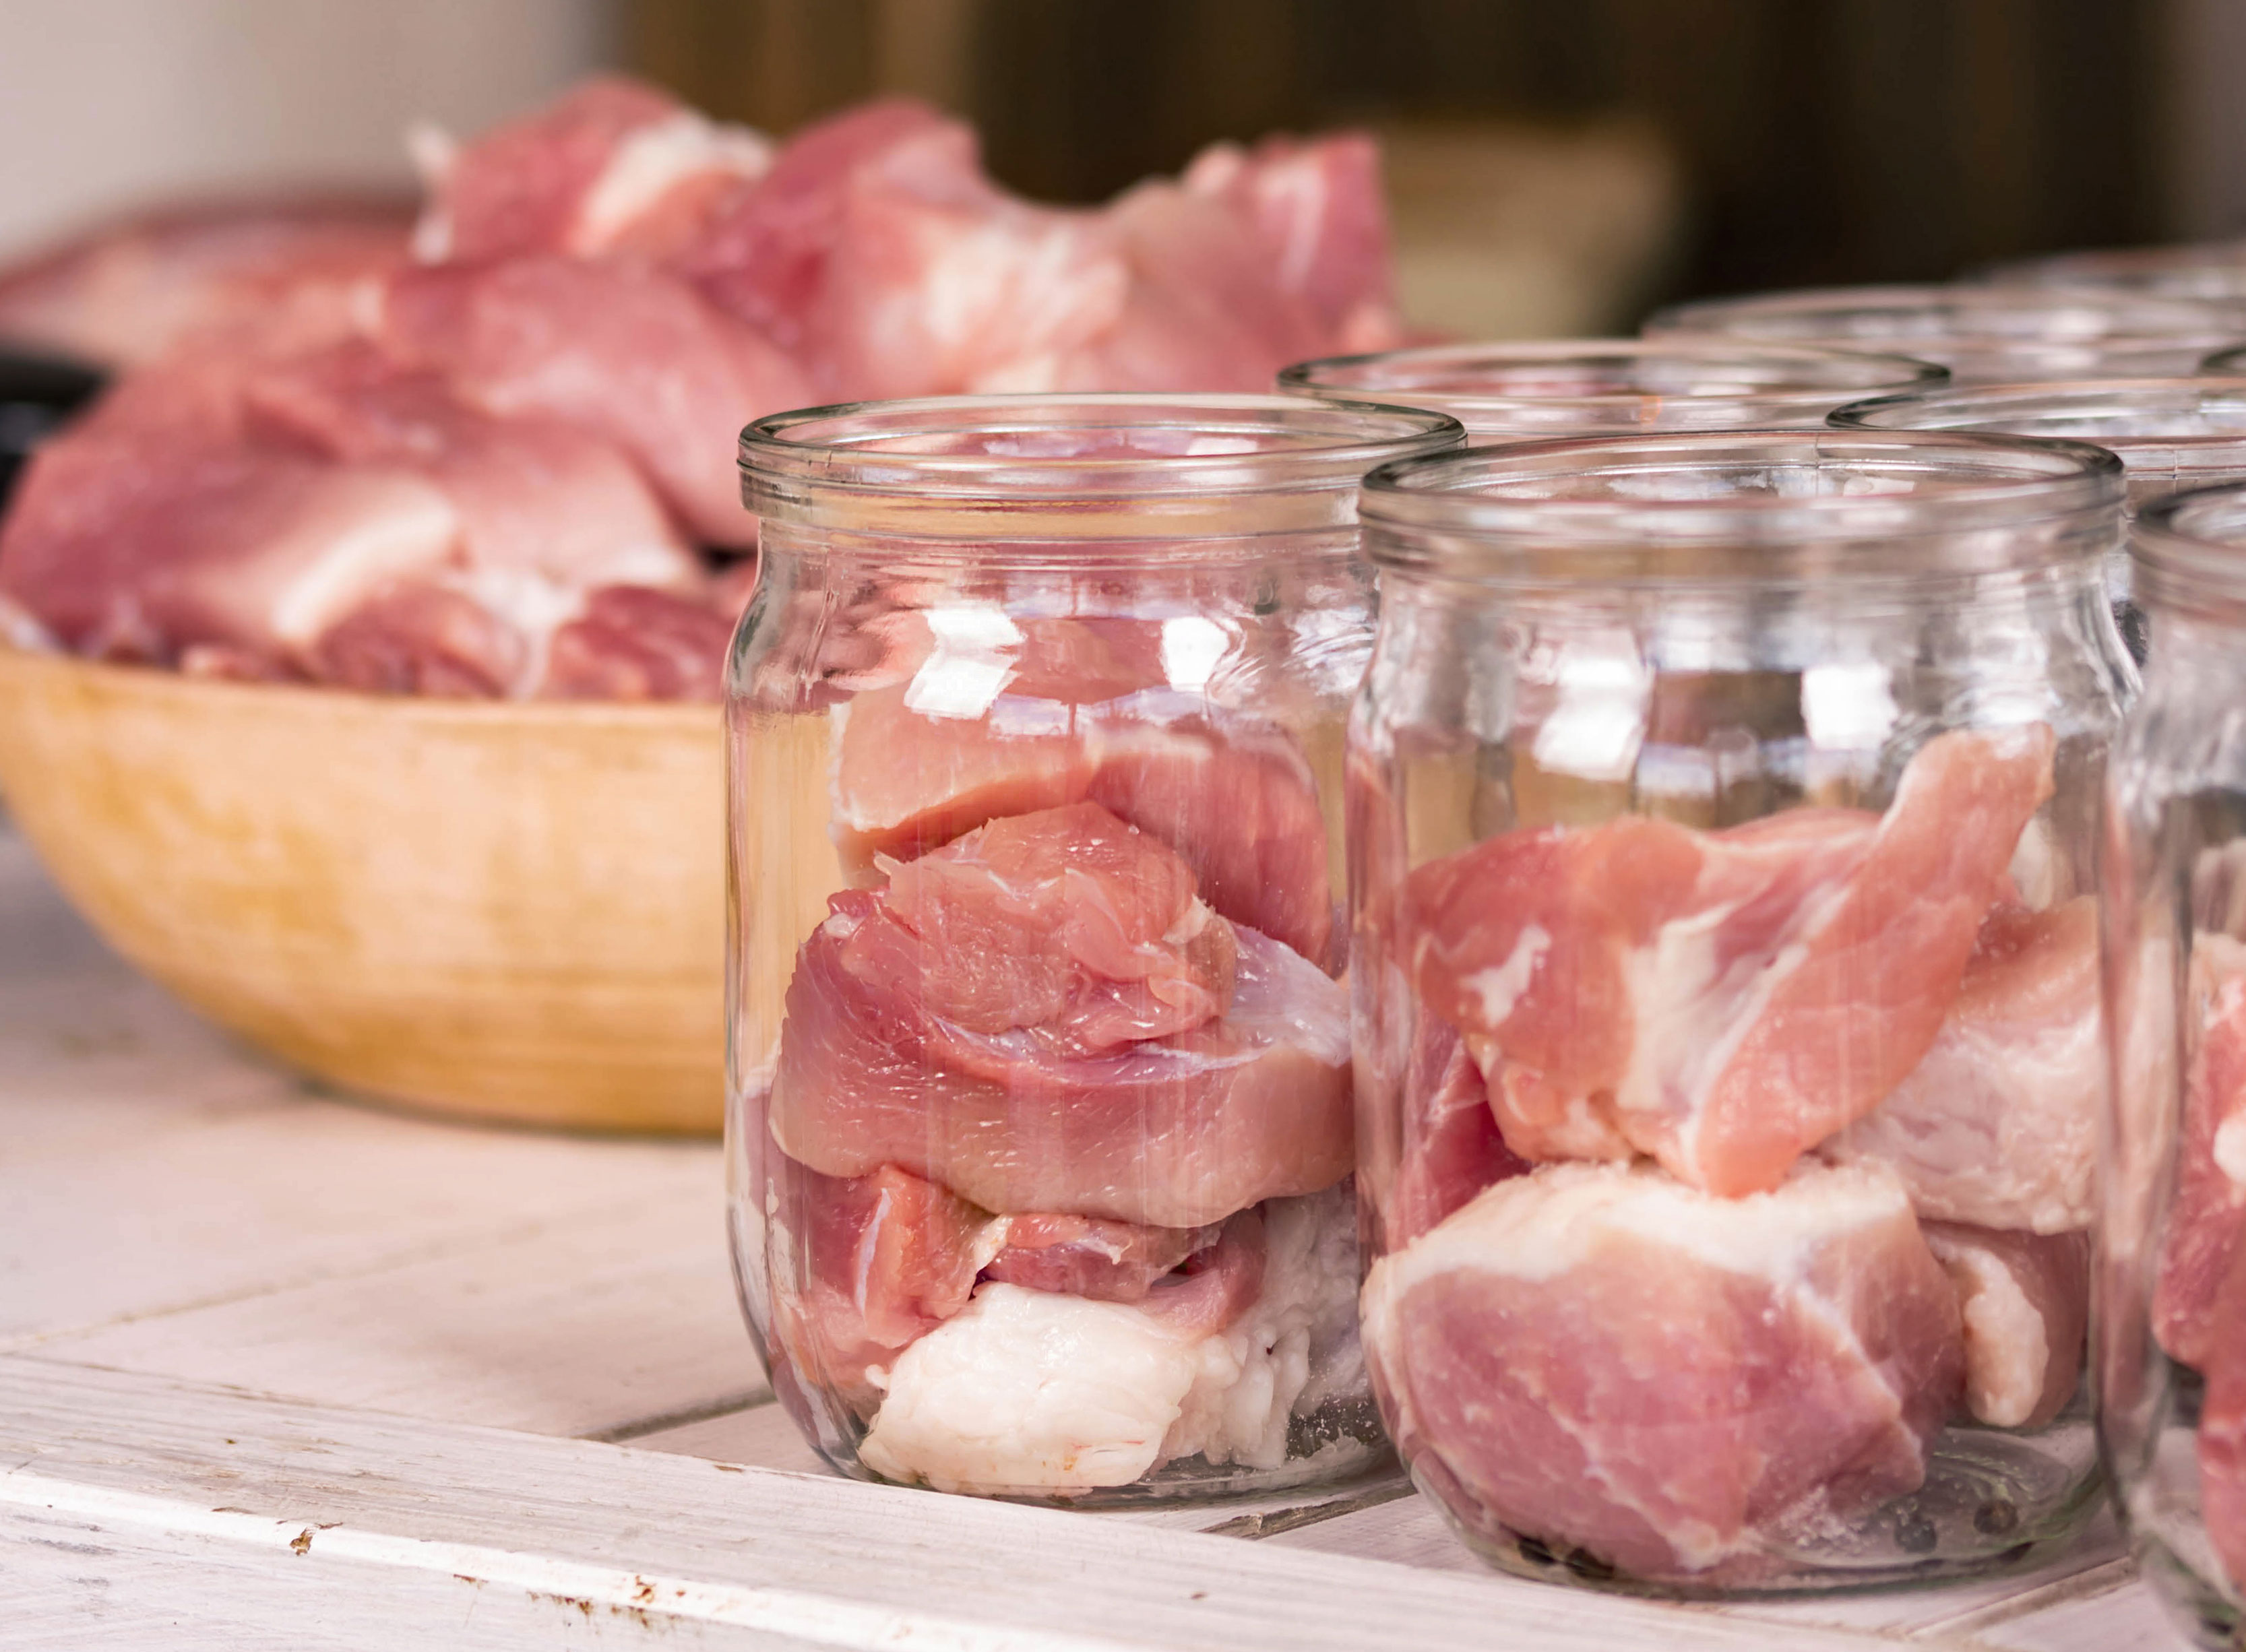 A bowl of raw meat being distributed into clear, glass jars.